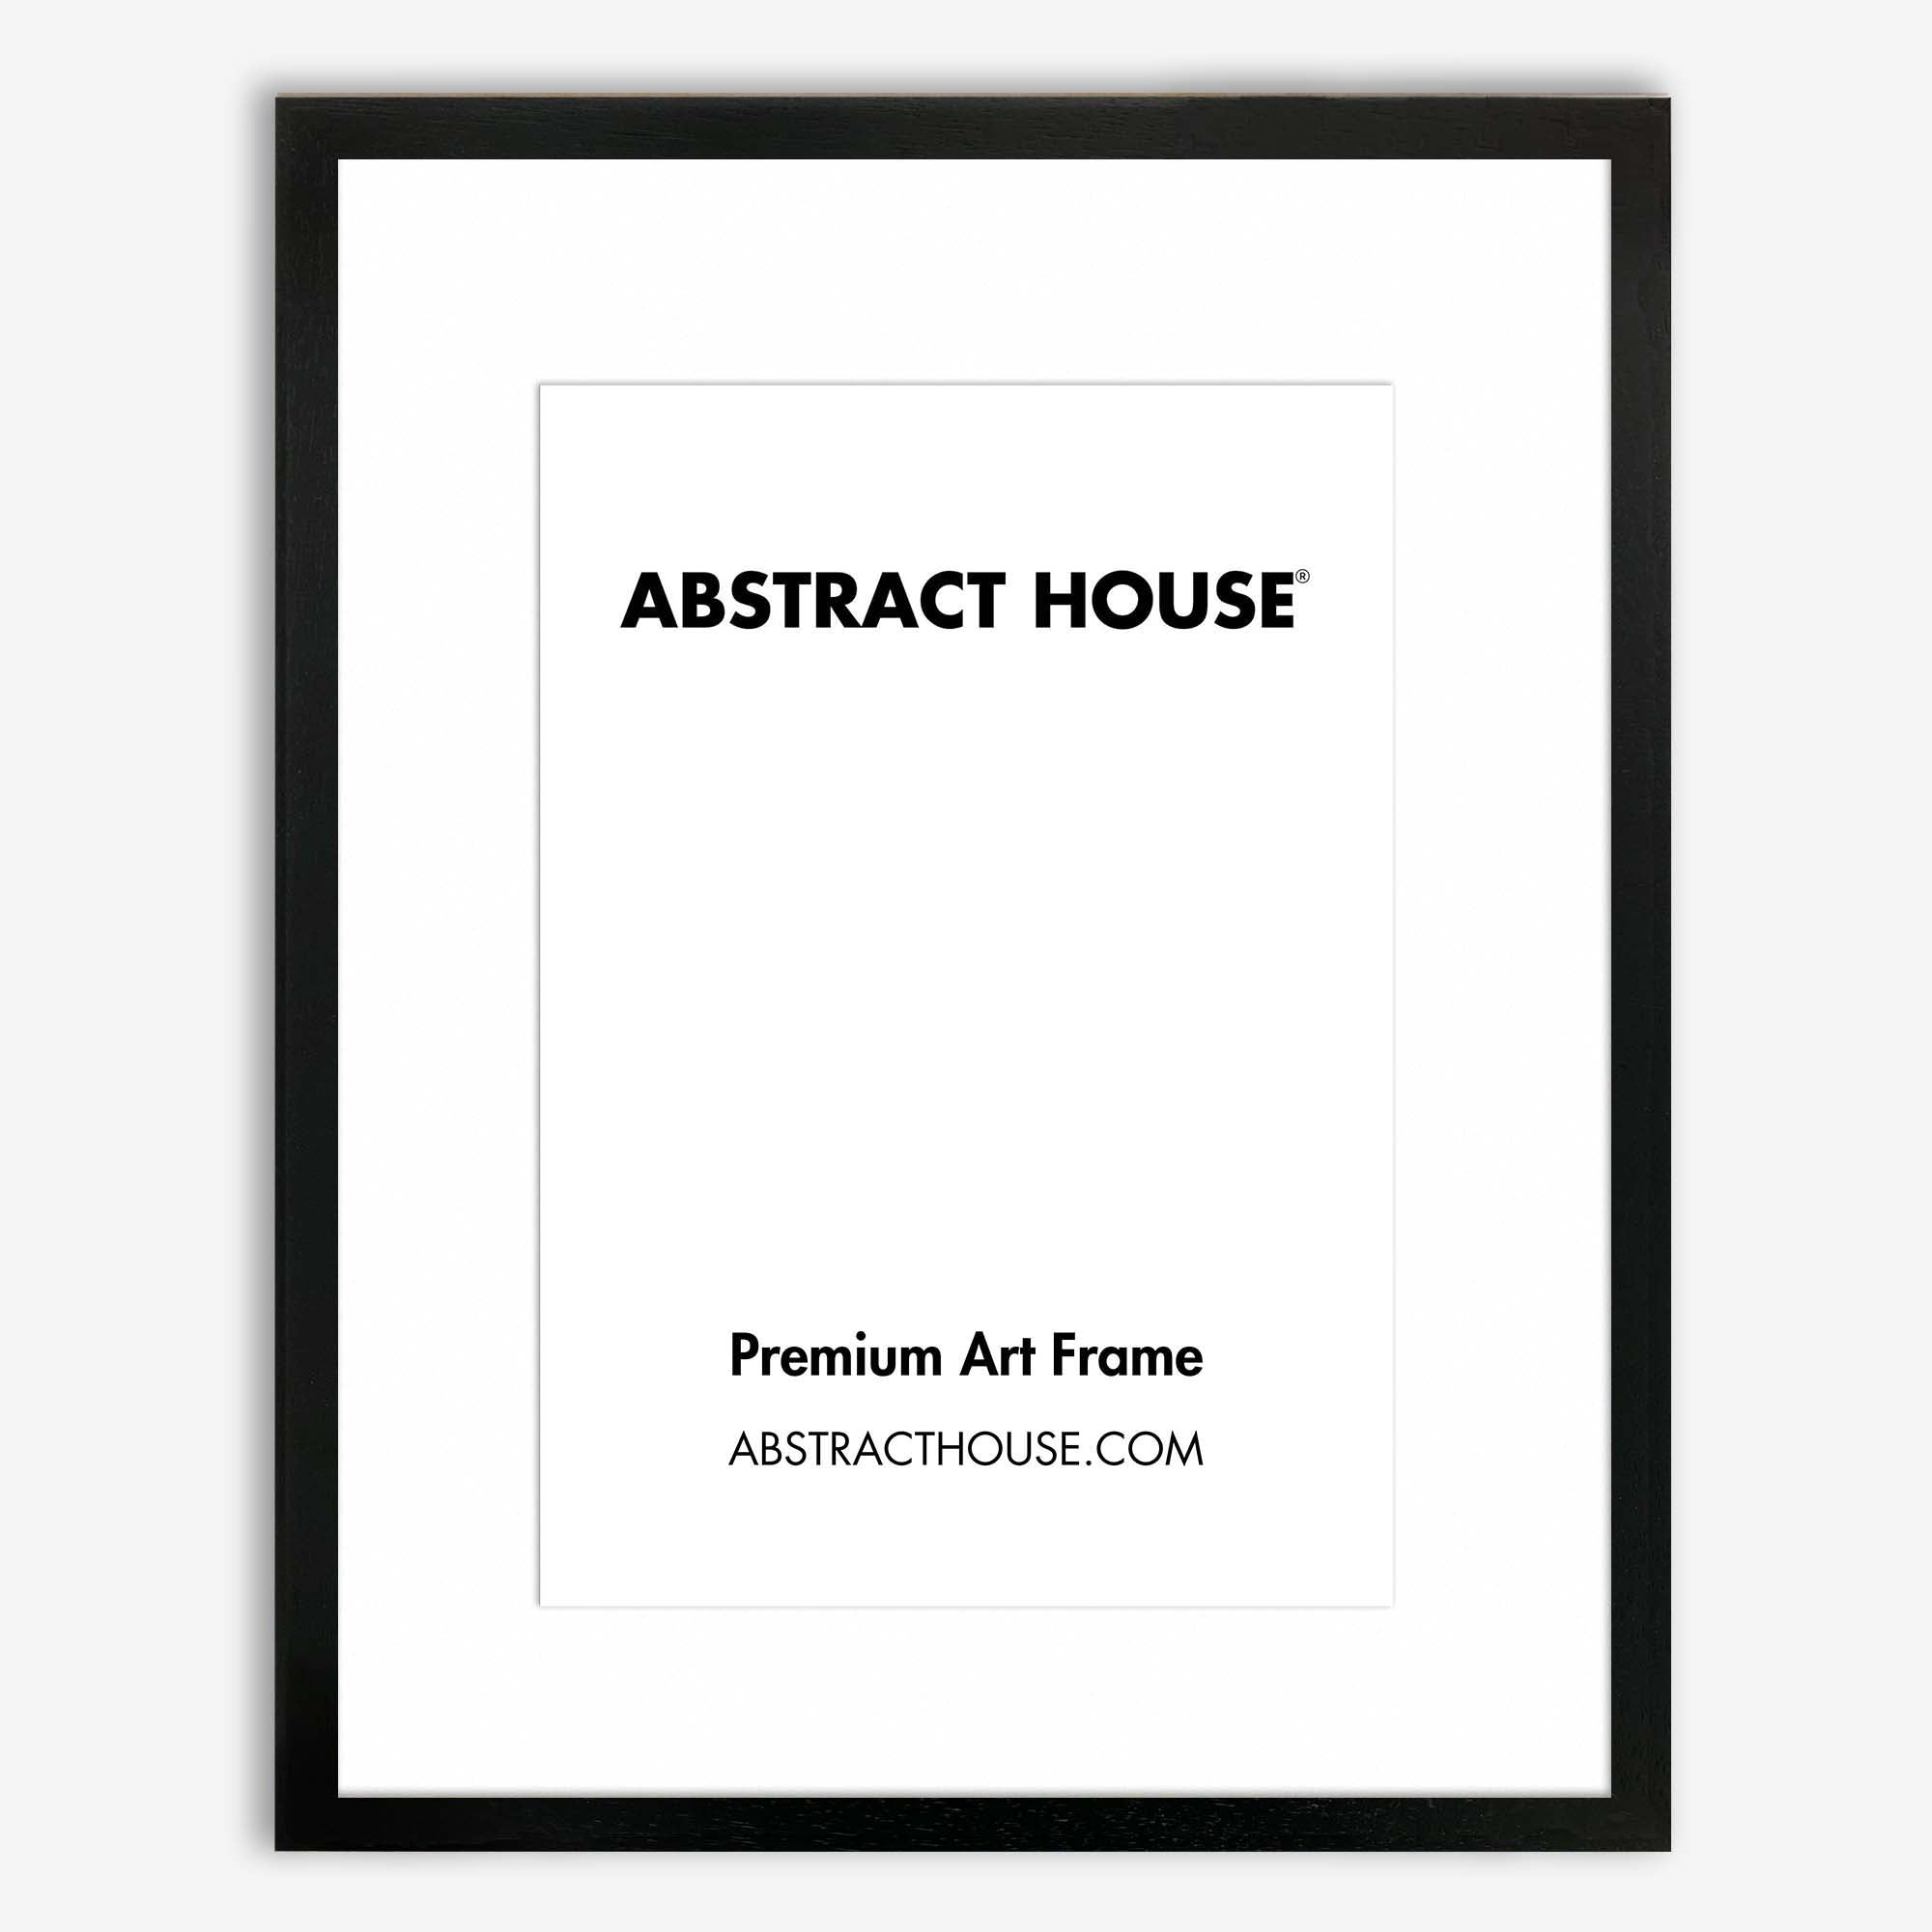 50x60cm Wooden Frame-Black-A3 29.7 x 42cm / 11.7 x 16.5 Inches-Abstract House